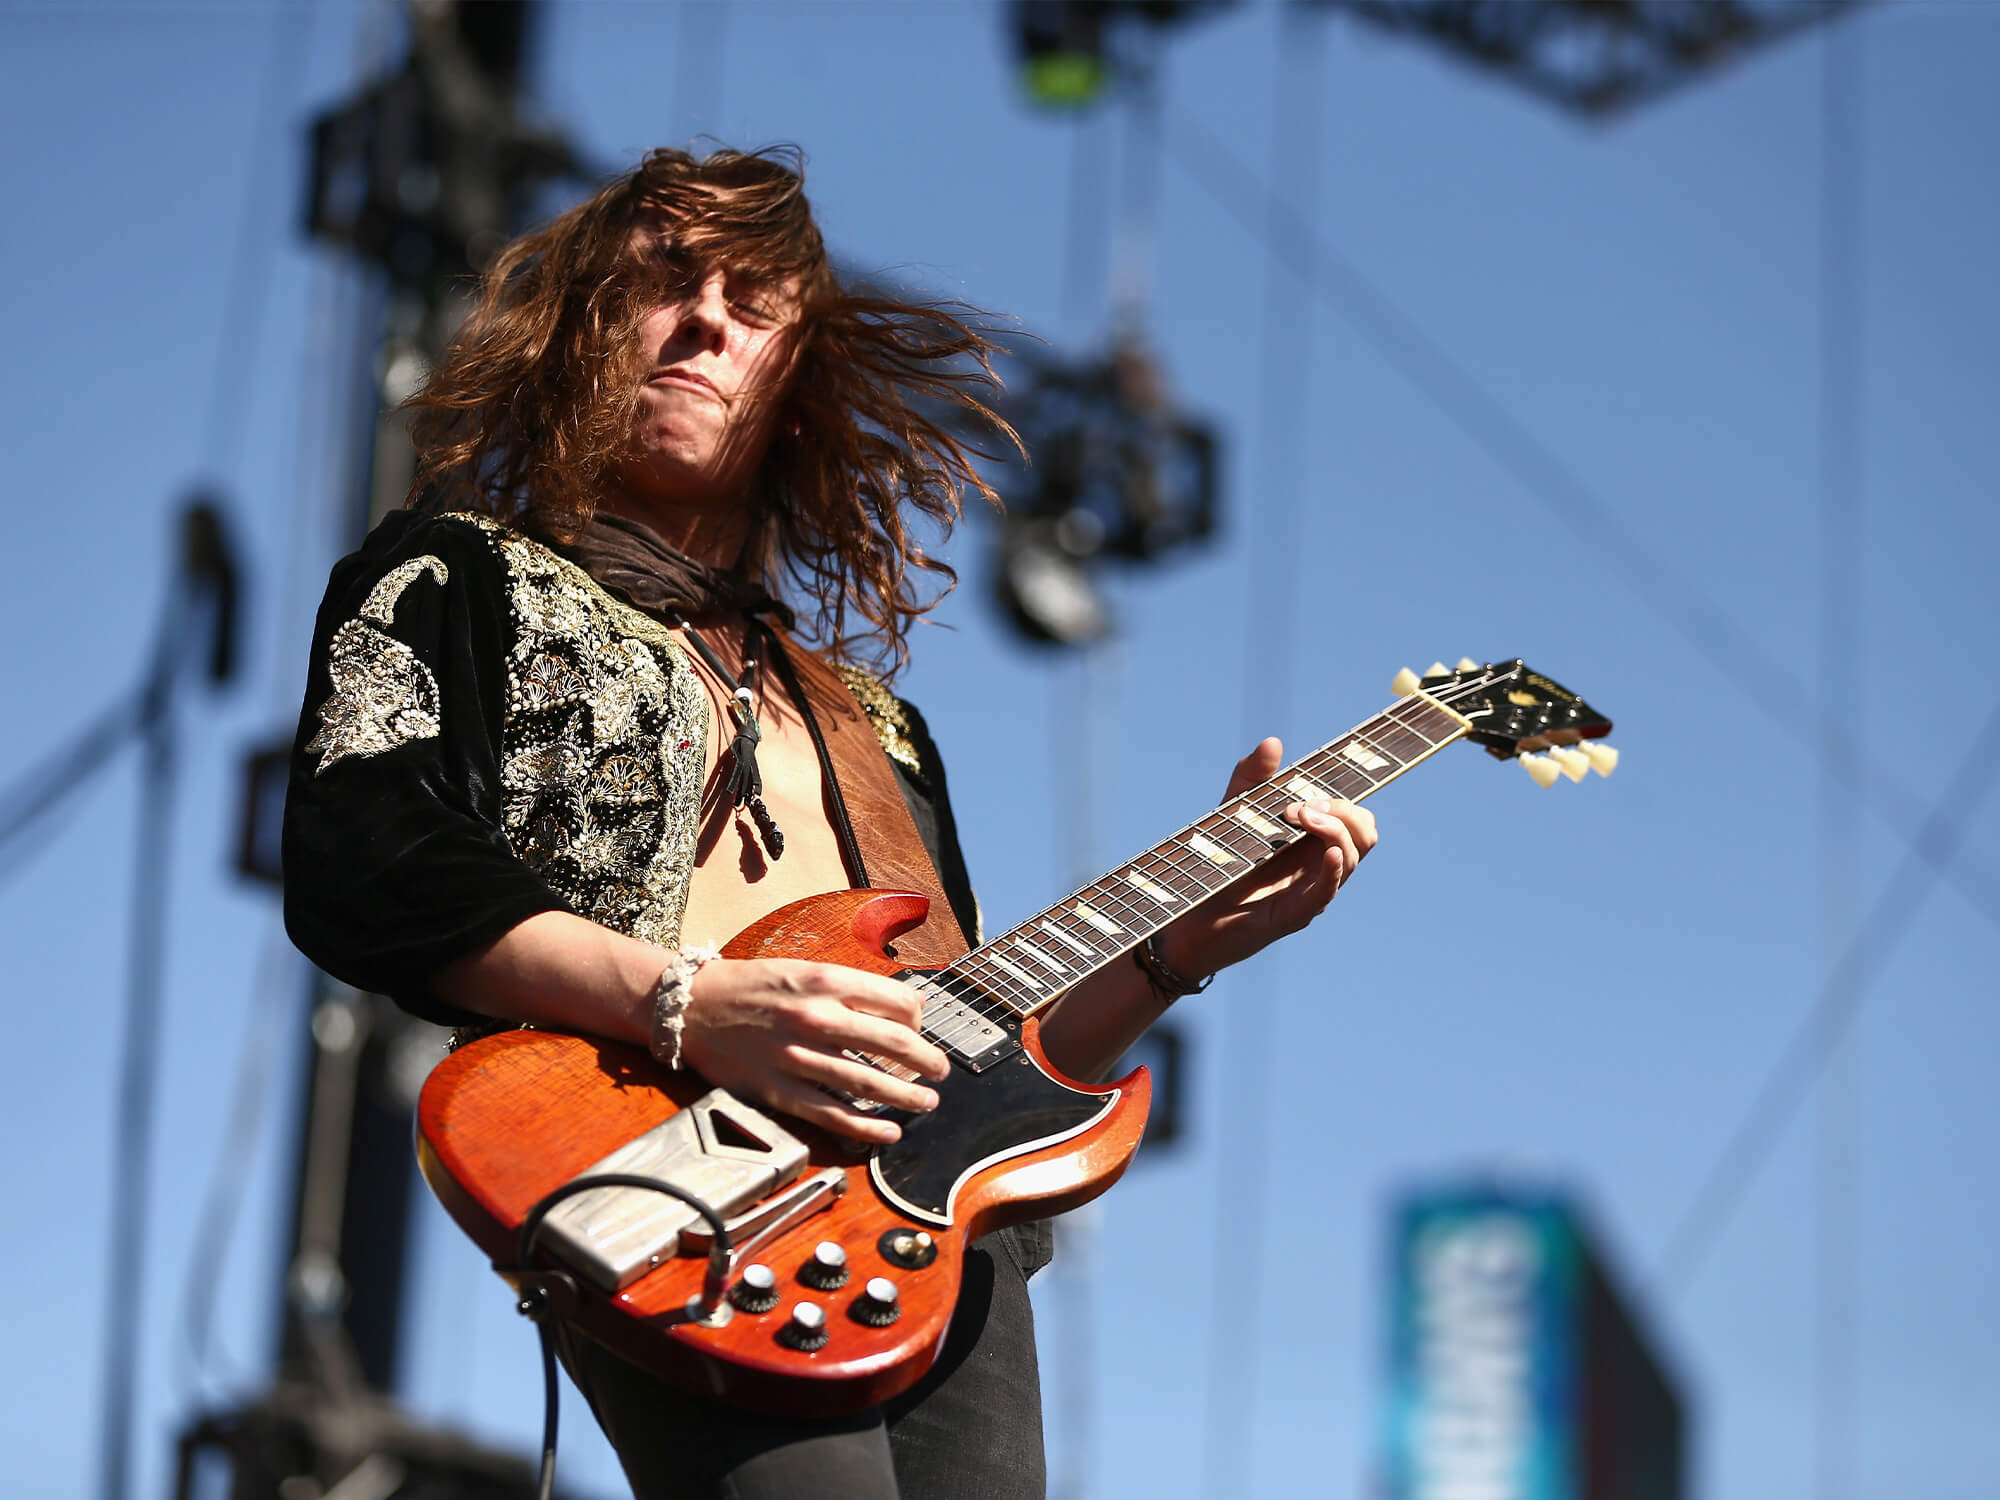 Jake Kiszka on stage. He is playing guitar and his hair is swished to the side.